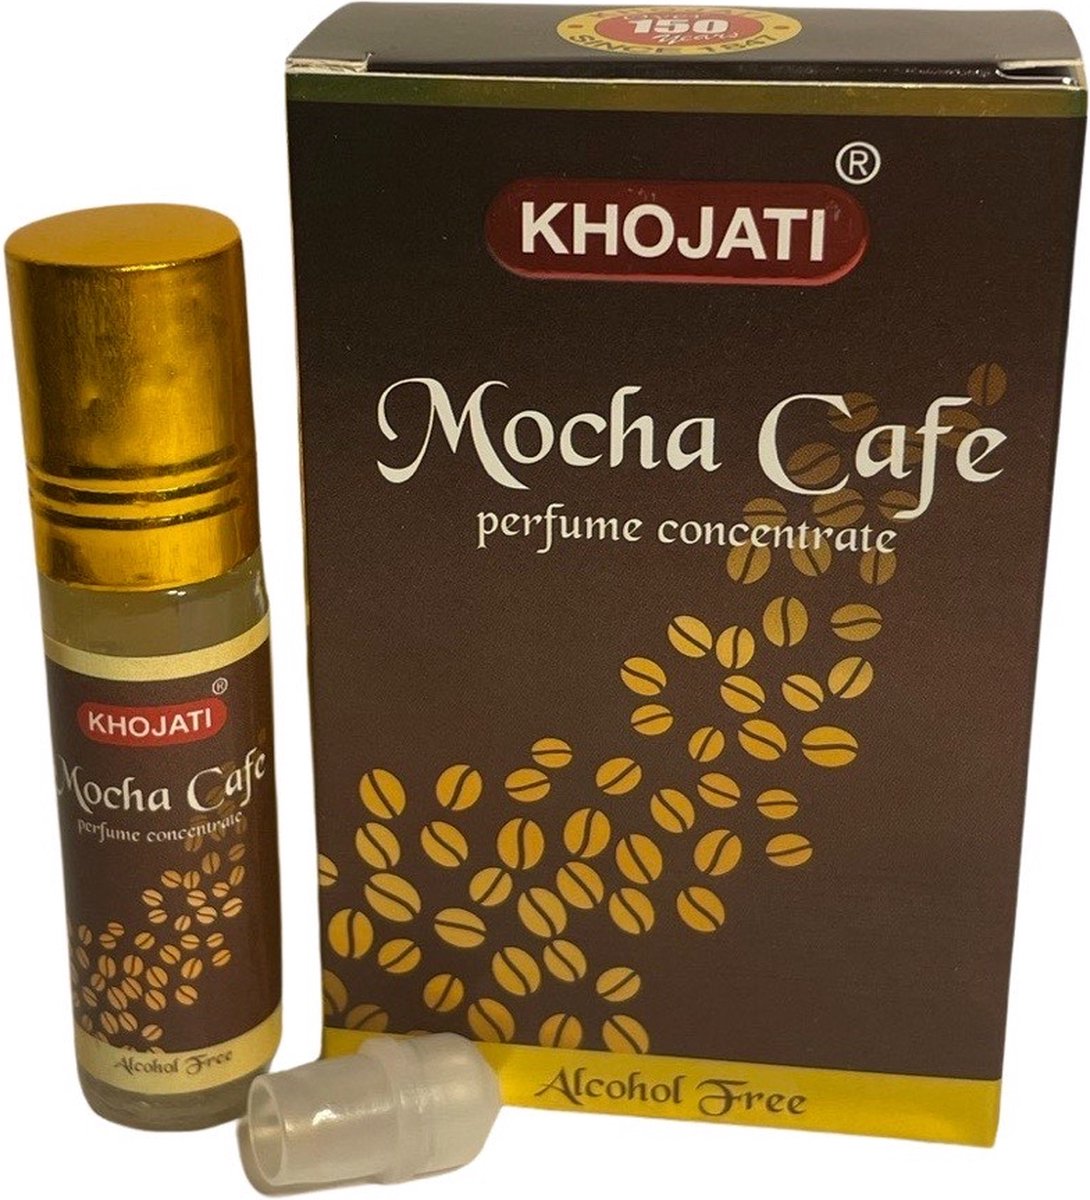 K-Veda - Mocha Cafe Perfume Concentrate - 6ml - Alcohol-Free - Indulge in the Rich Aroma of Cafe Mocha - A Sensational Fragrance for Coffee Aficionados